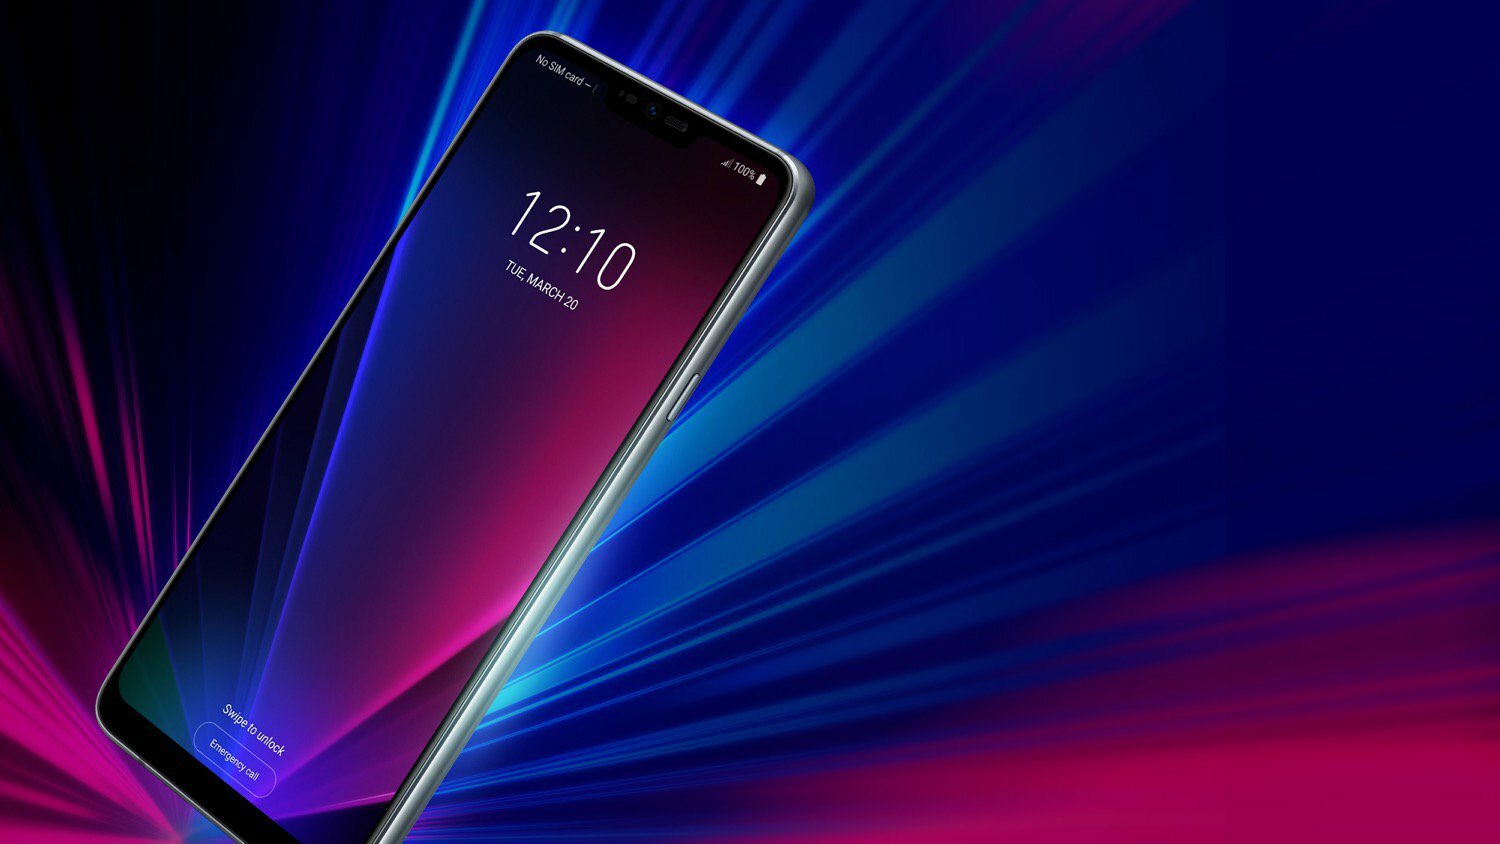 Is there anything else I should know about the LG G7 ThinQ?